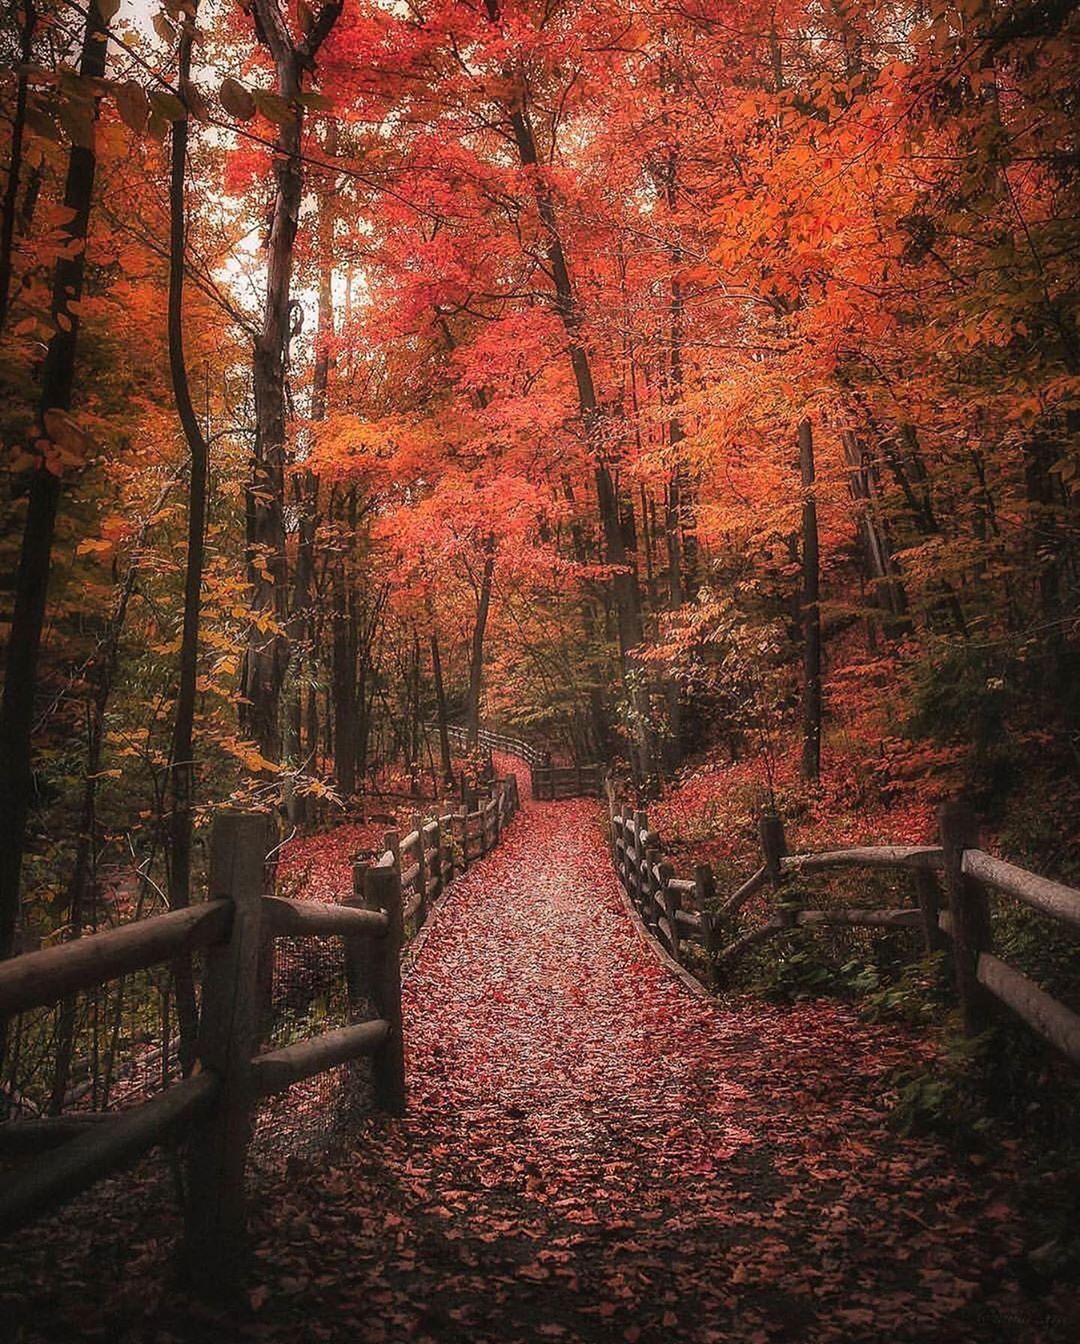 Toronto, Ontario - Some fall magic from Toronto! Have a great weekend